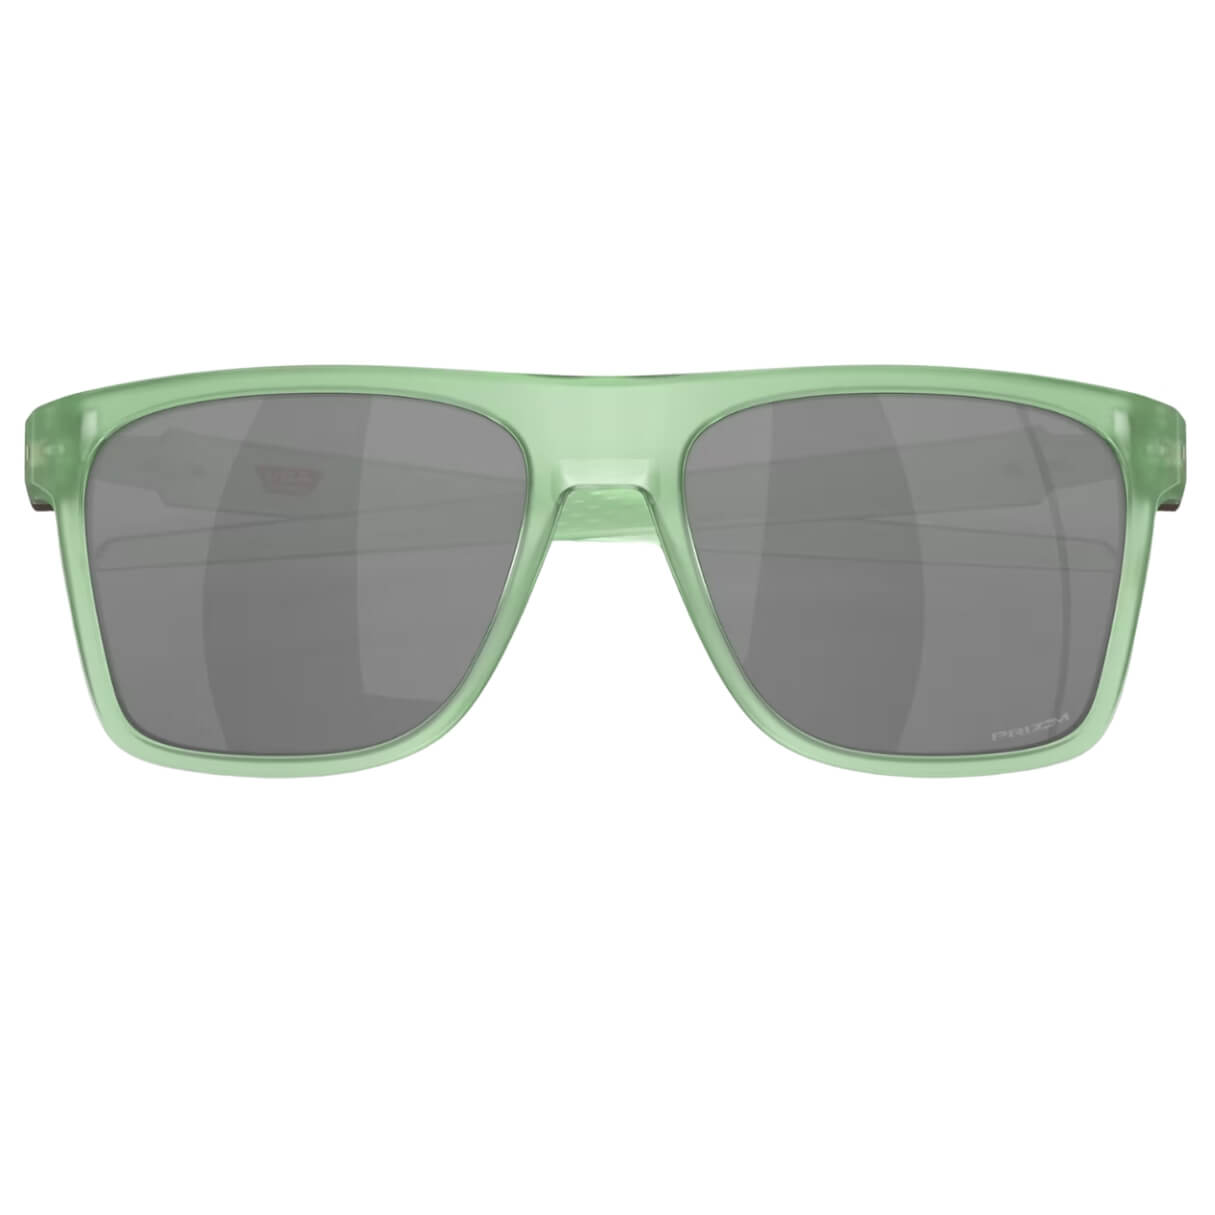 Oakley OO9100 Leffingwell 910017 Sunglasses - Matte Jade with Prizm Lens Folding View